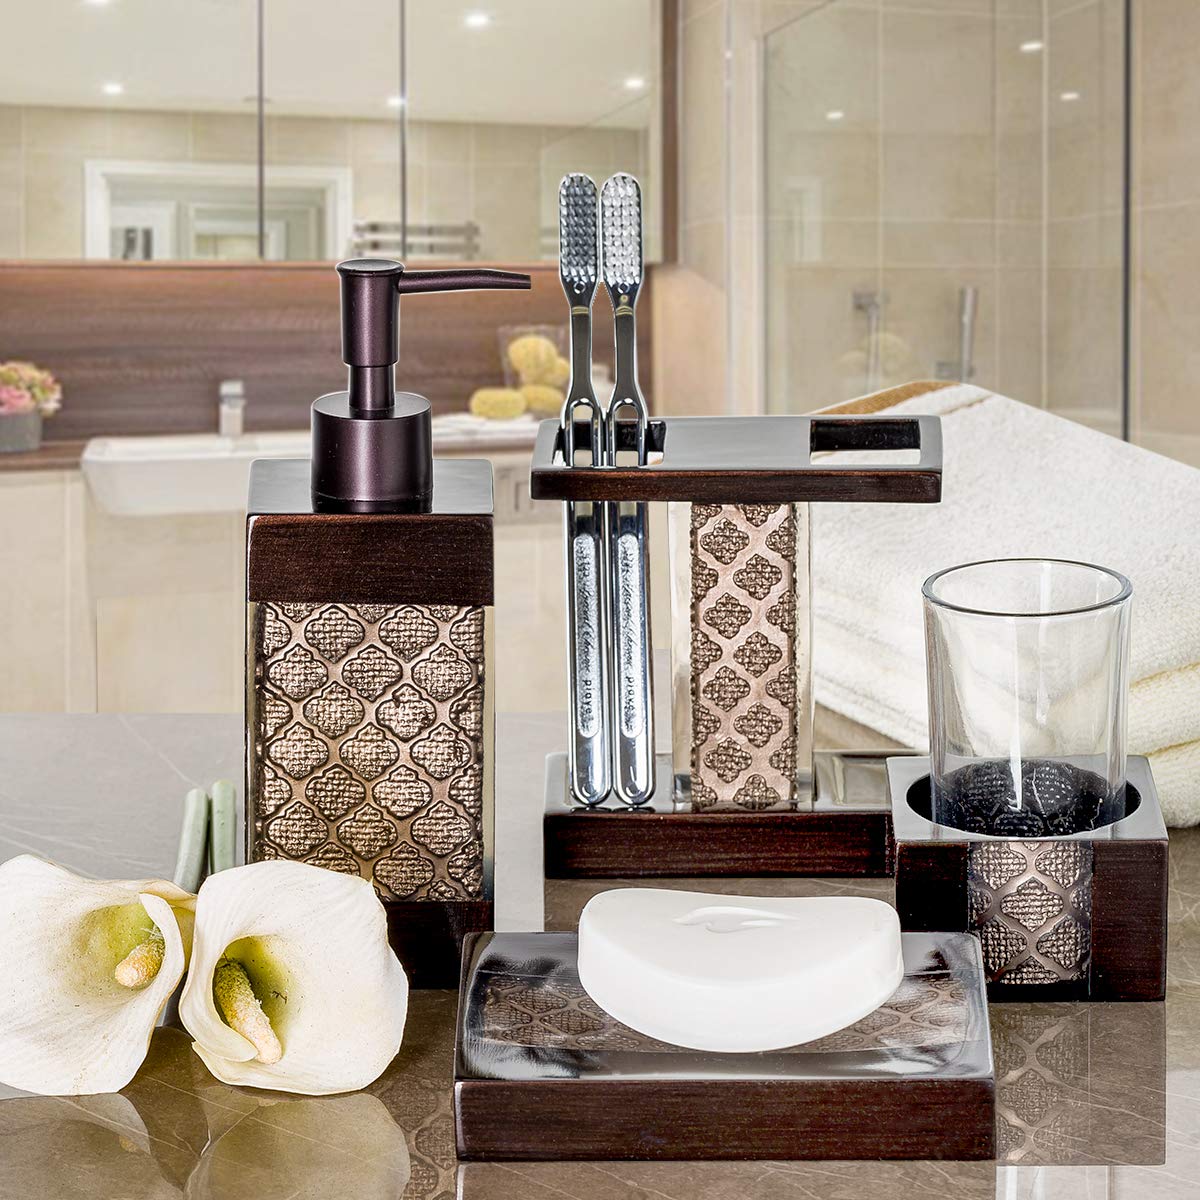 Creative Scents Bronze Bathroom Accessories Sets Complete - Decorative Bathroom Accessory Set - 4 Pc Bathroom Set Includes: Soap Dispenser, Toothbrush Holder, Tumbler and Soap Dish (Dahlia Collection)  - Like New